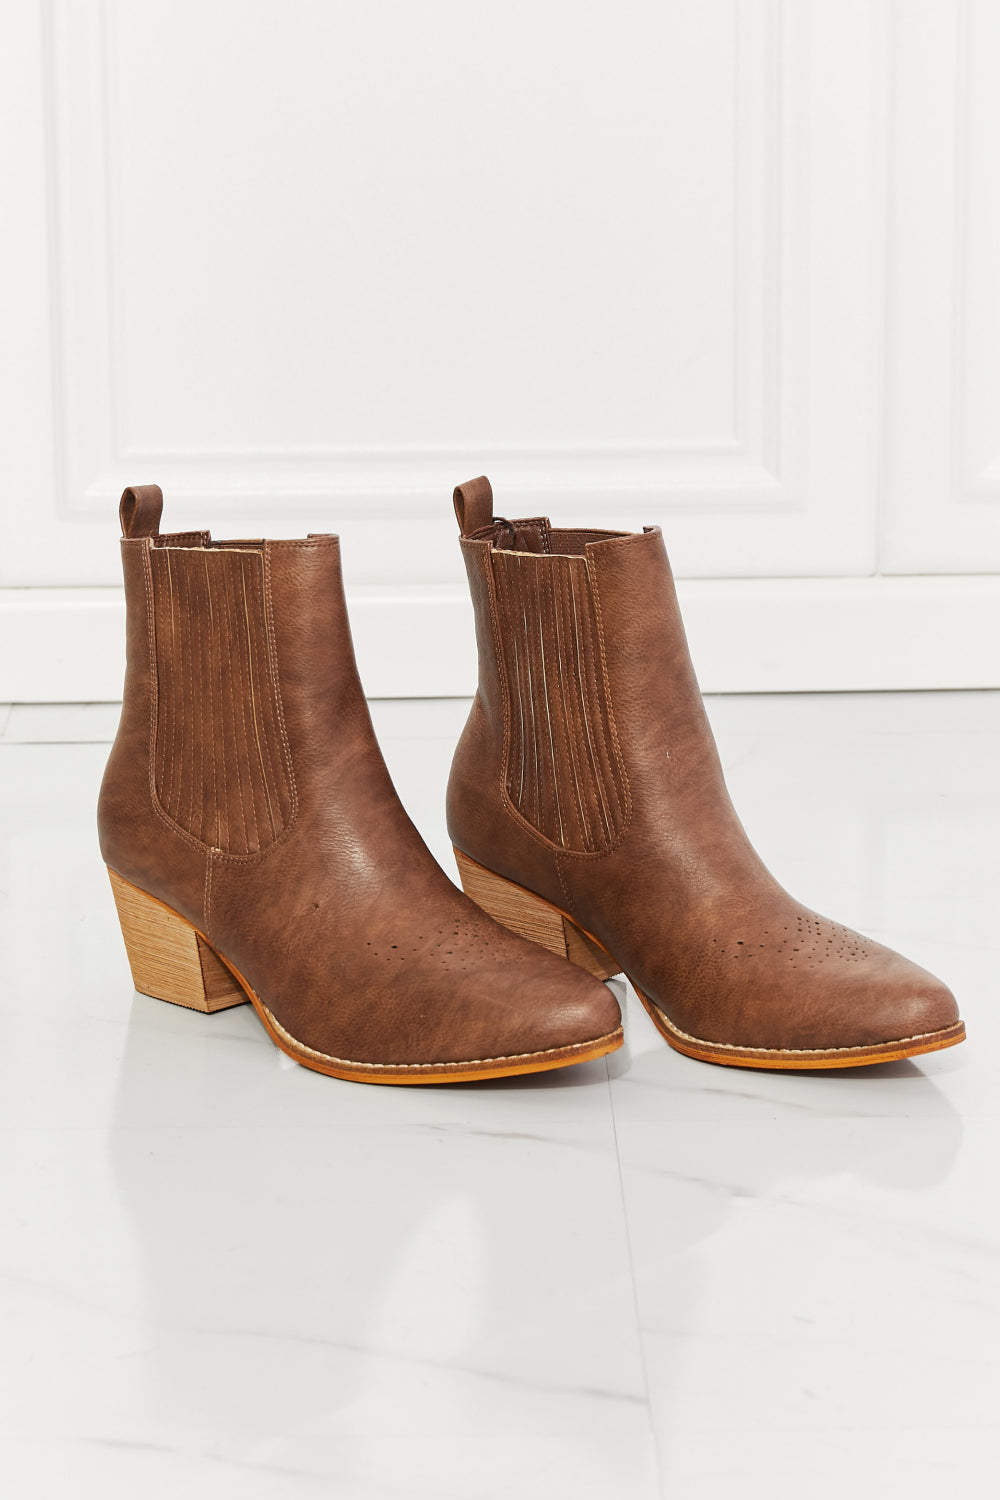 MMShoes Love the Journey Stacked Heel Chelsea Boot in Chestnut Print on any thing USA/STOD clothes